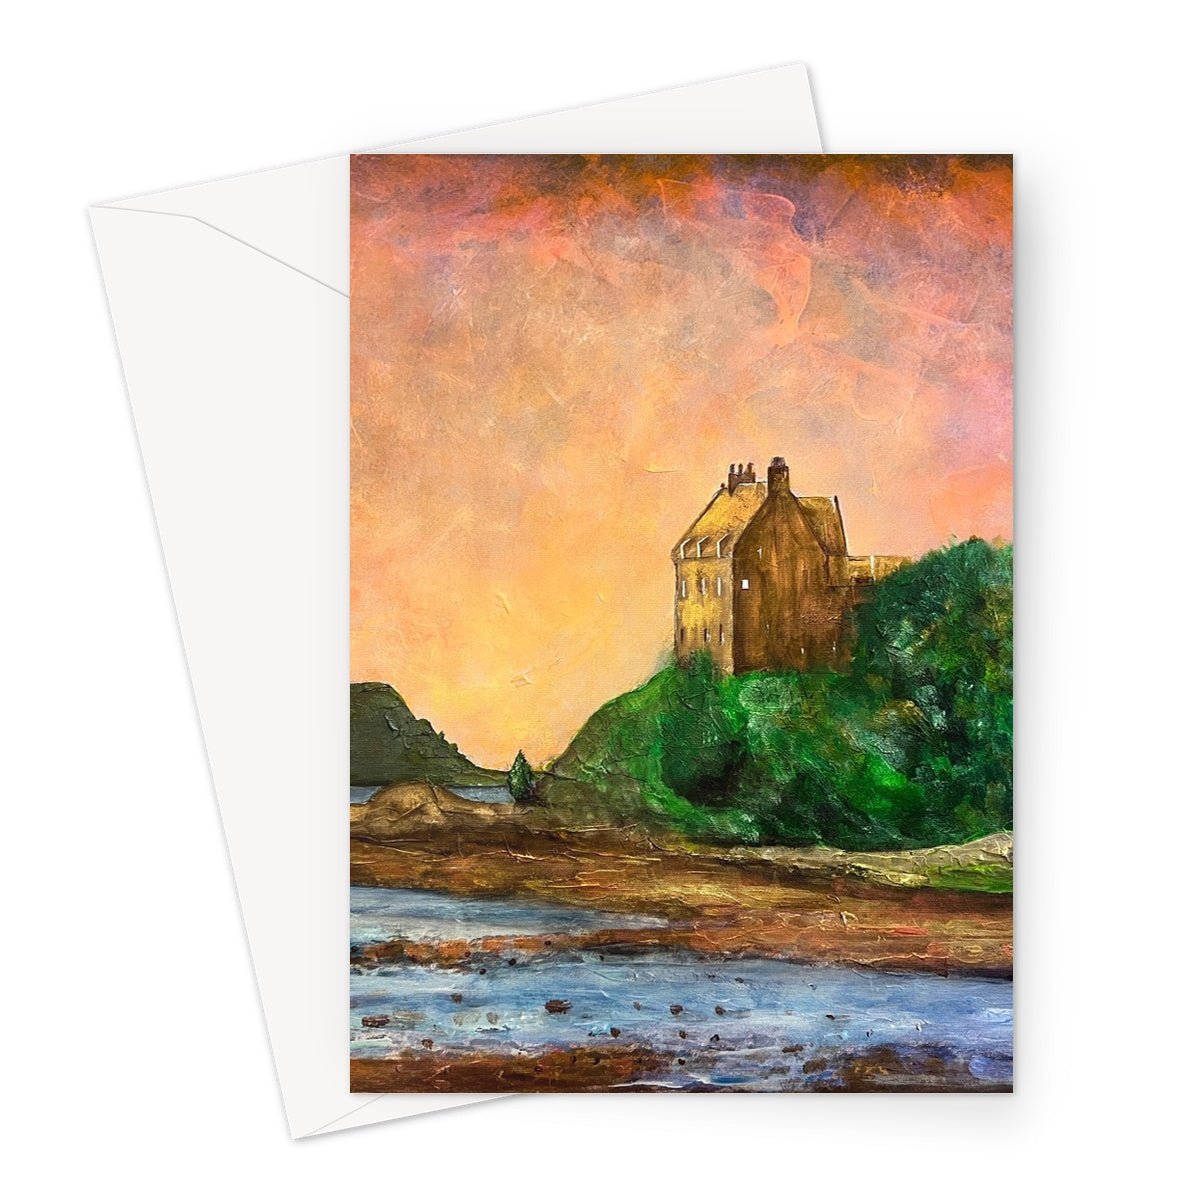 Duntrune Castle Art Gifts Greeting Card-Greetings Cards-Historic & Iconic Scotland Art Gallery-A5 Portrait-1 Card-Paintings, Prints, Homeware, Art Gifts From Scotland By Scottish Artist Kevin Hunter